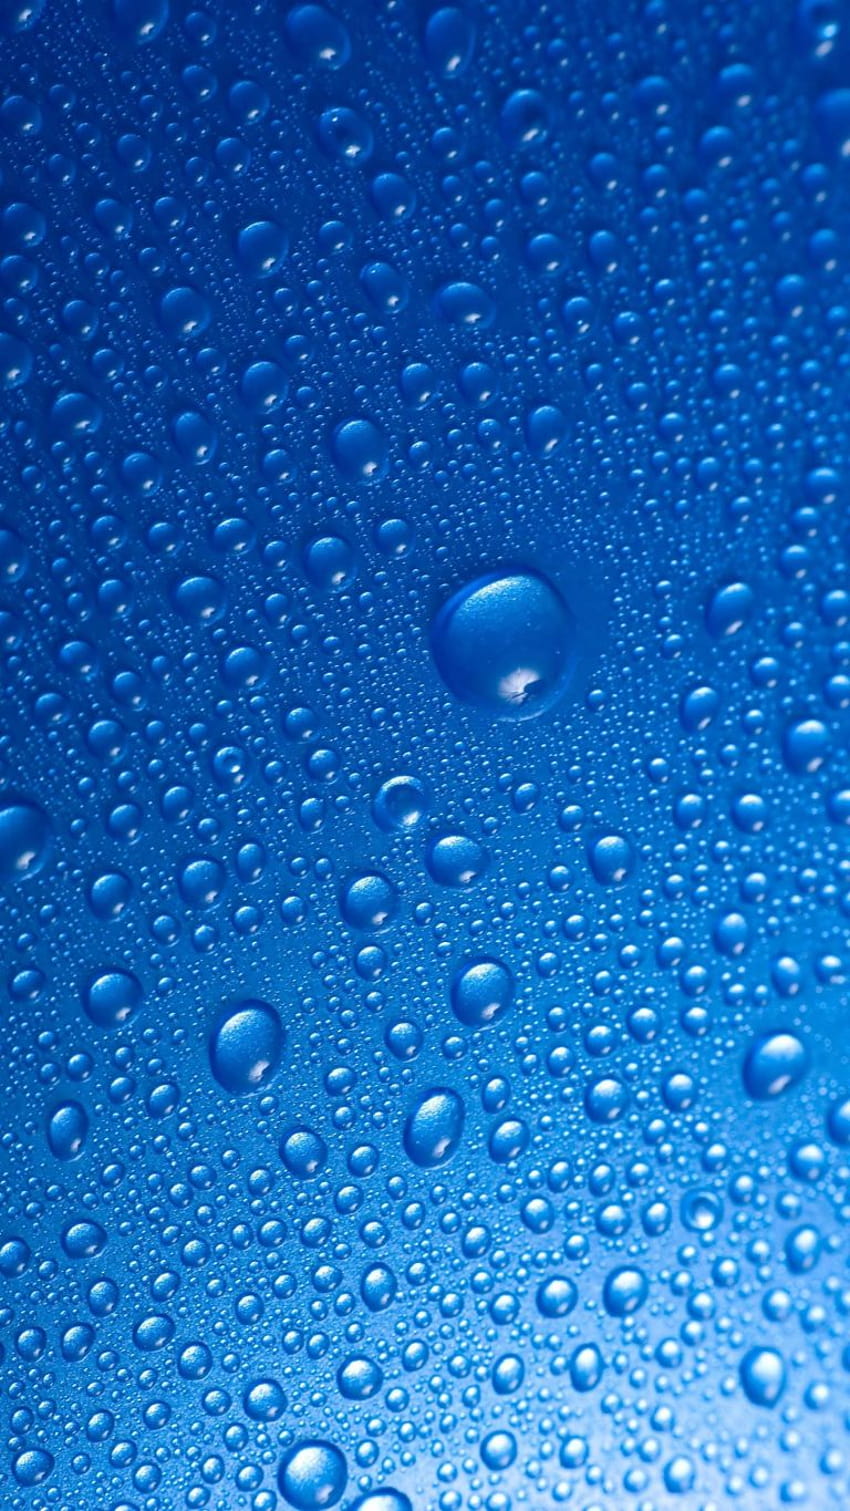 Samsung Galaxy Water Drops Ultra Backgrounds, samsung mobile HD phone wallpaper